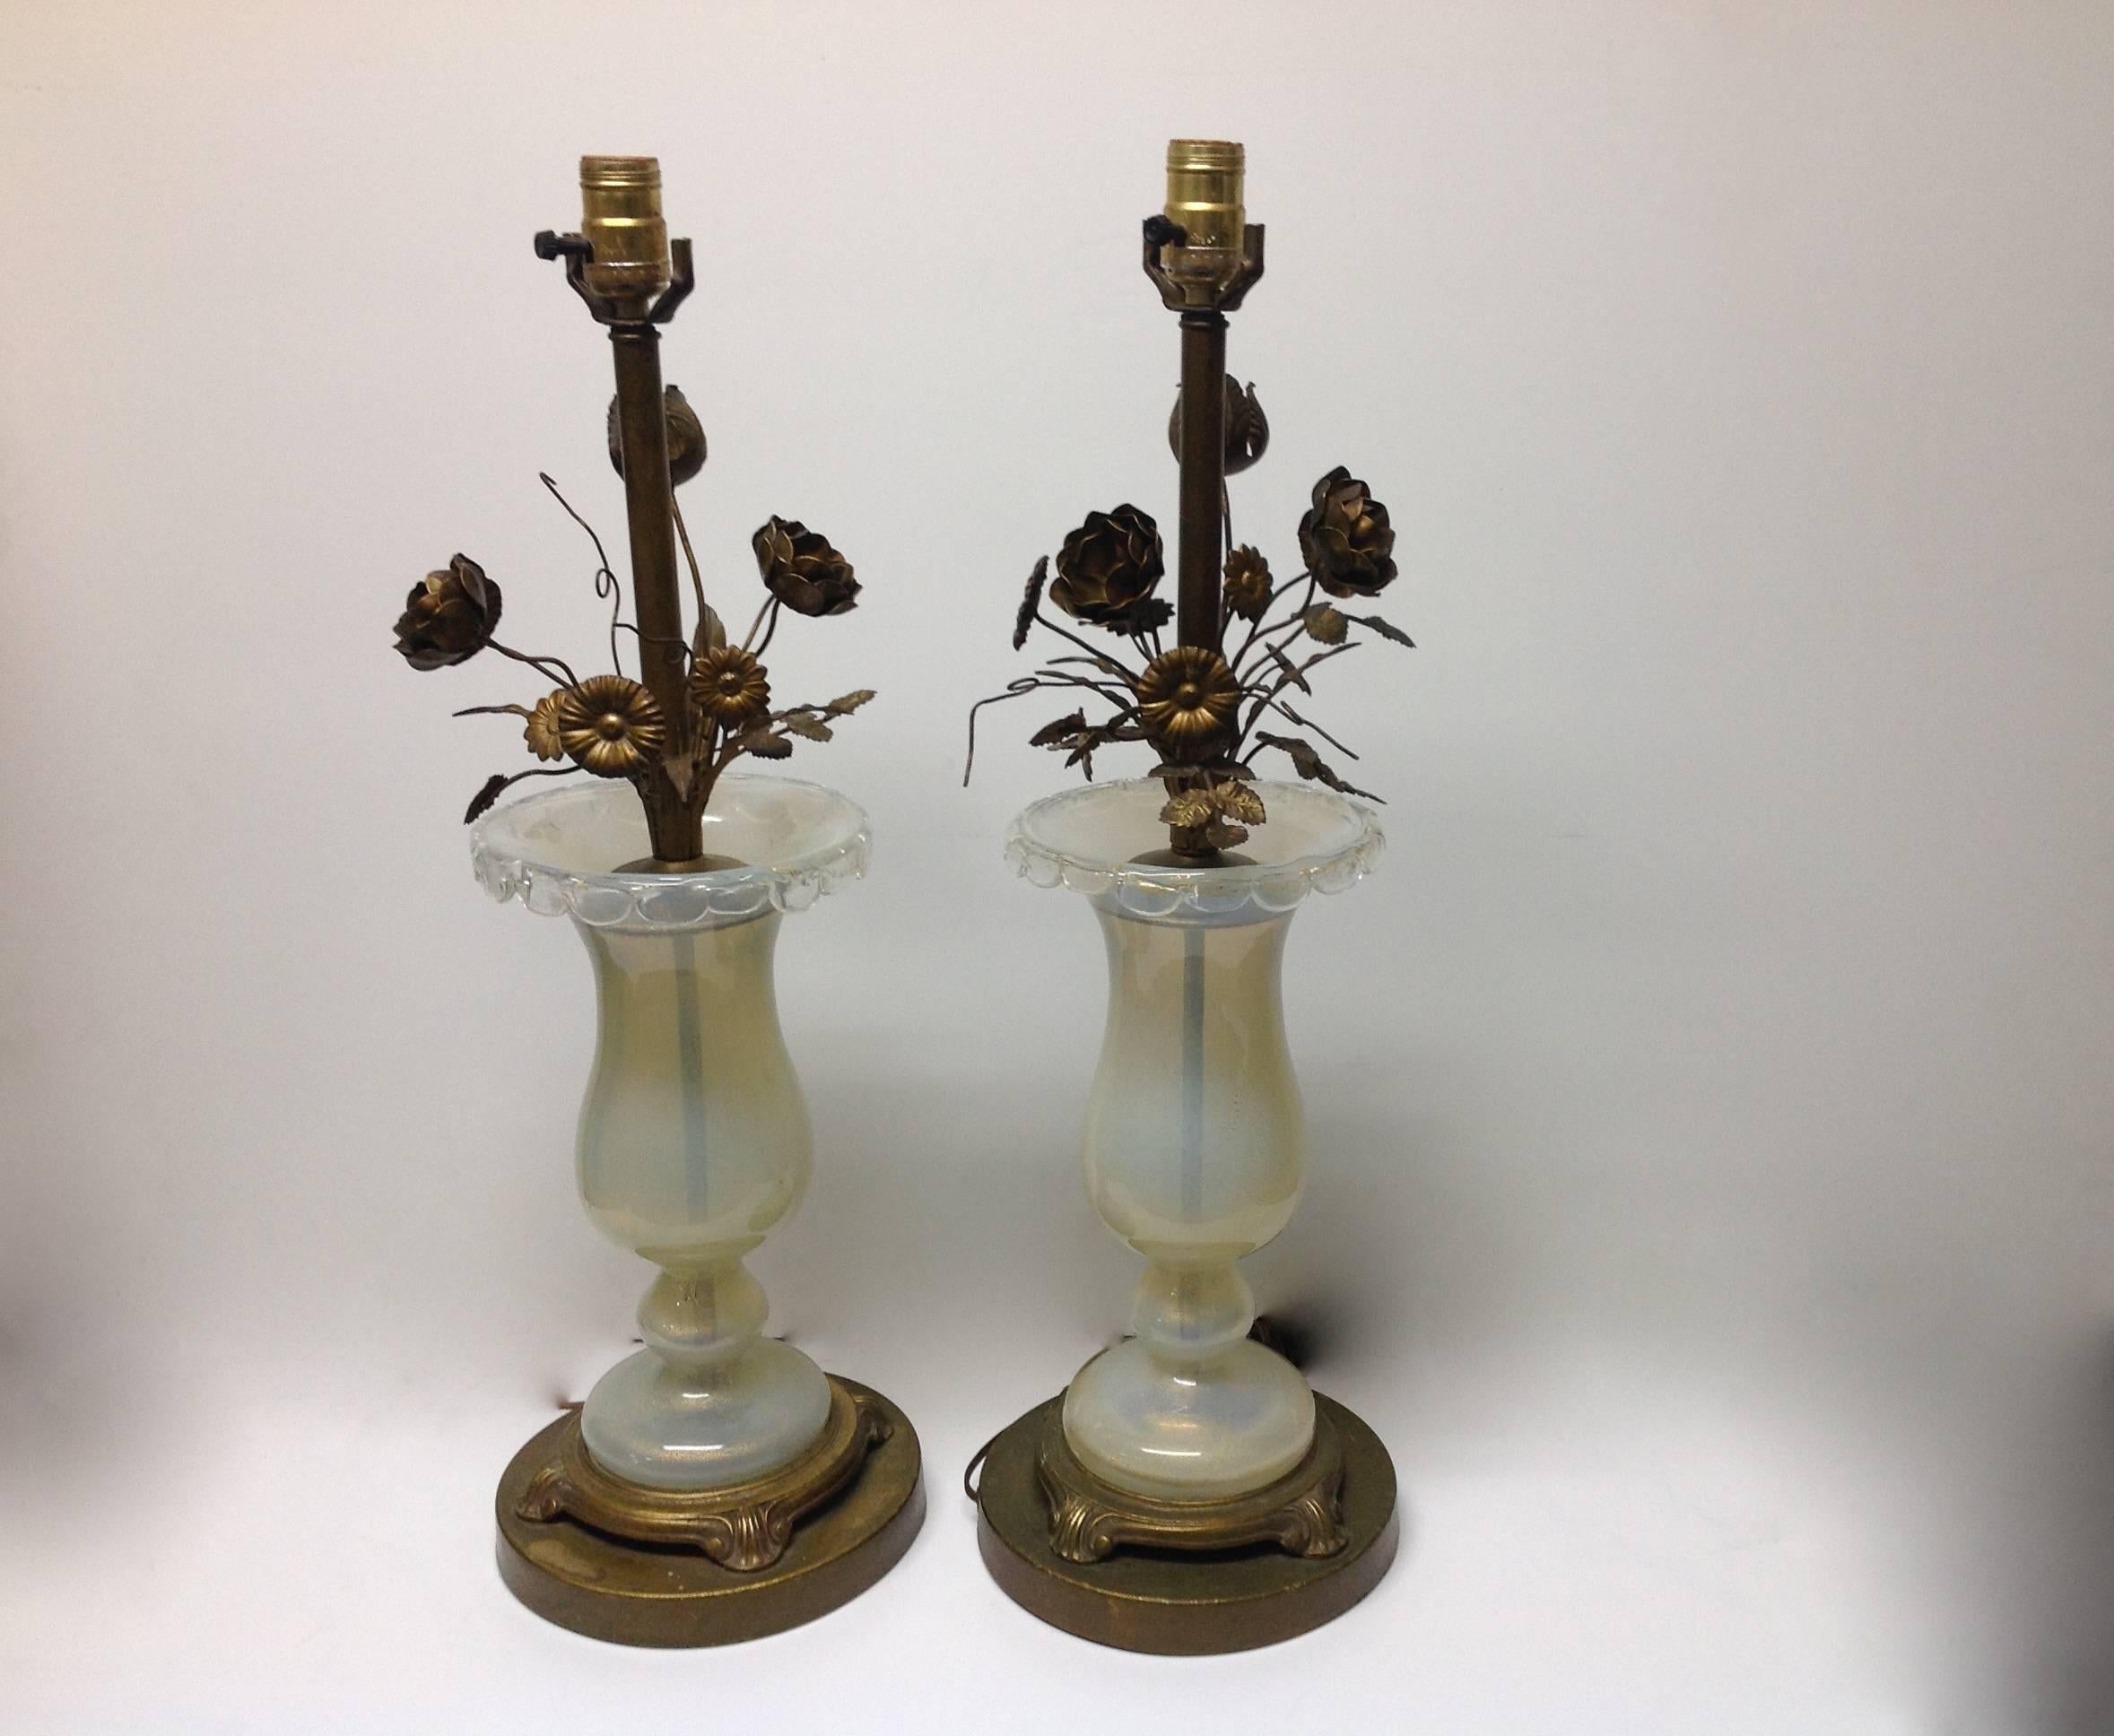 Beautiful pair of handblown Murano glass lamps filled with aventurine. The tops of the glass portions have a draped and scalloped design all completely hand done. The flowers are brass as are the tiered bases. Original Made in Italy foil stickers